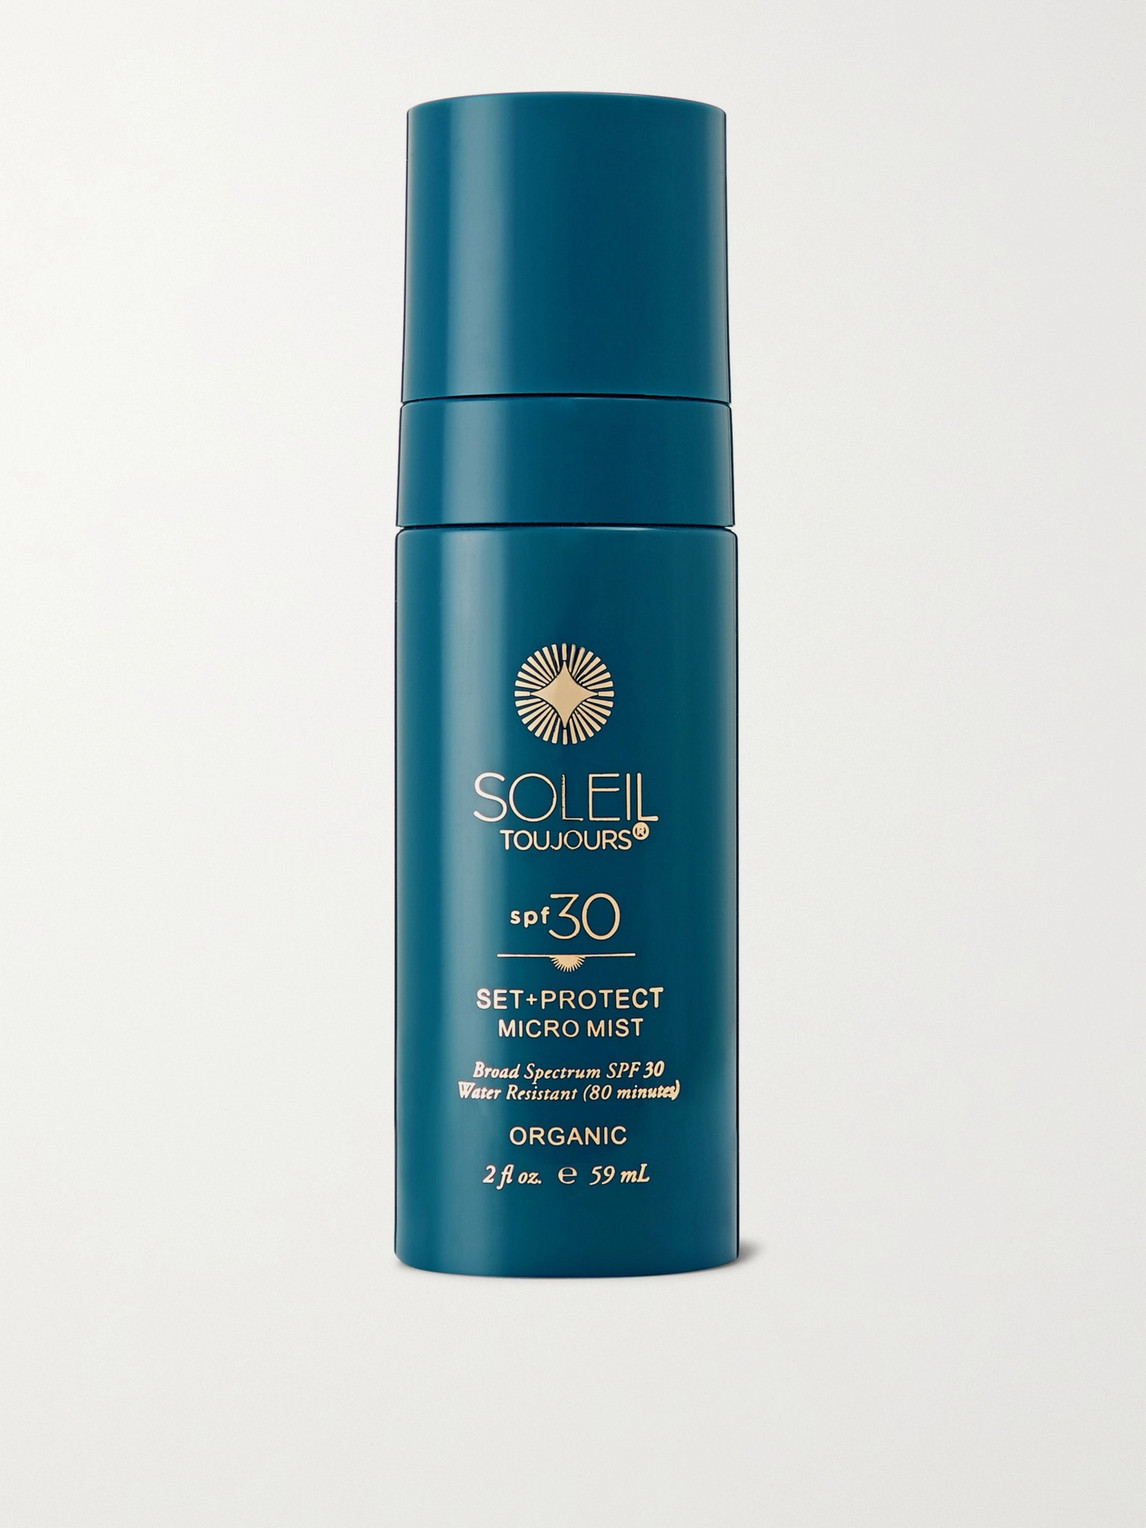 Soleil Toujours Organic Set Protect Micro Mist Spf30, 59ml In Colourless